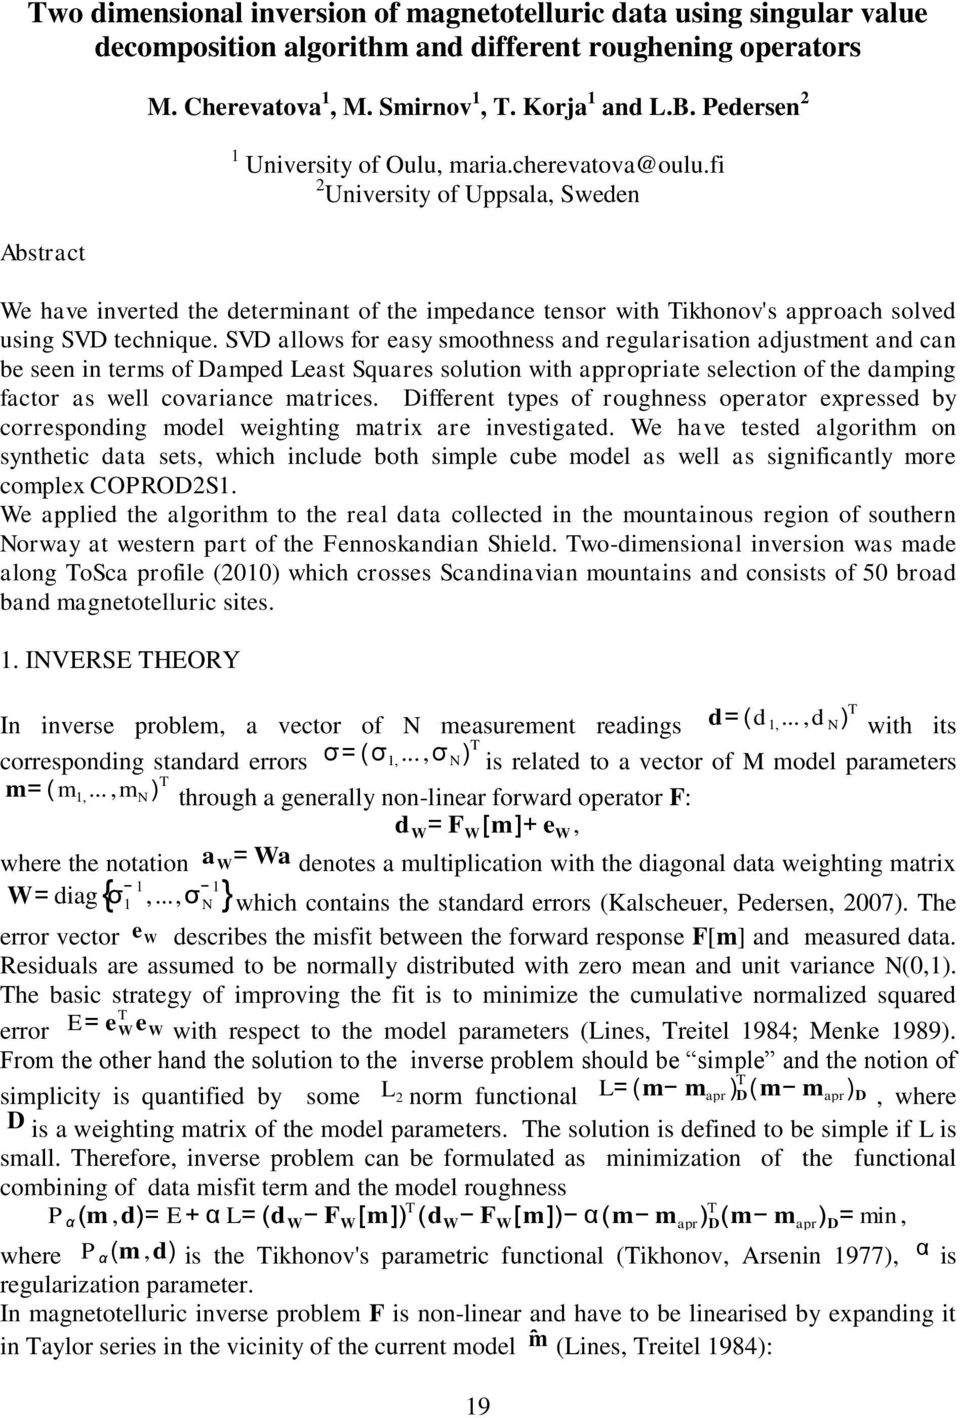 fi 2 University of Uppsala, Sweden Abstract We have inverted the determinant of the impedance tensor with Tikhonov's approach solved using SVD technique.